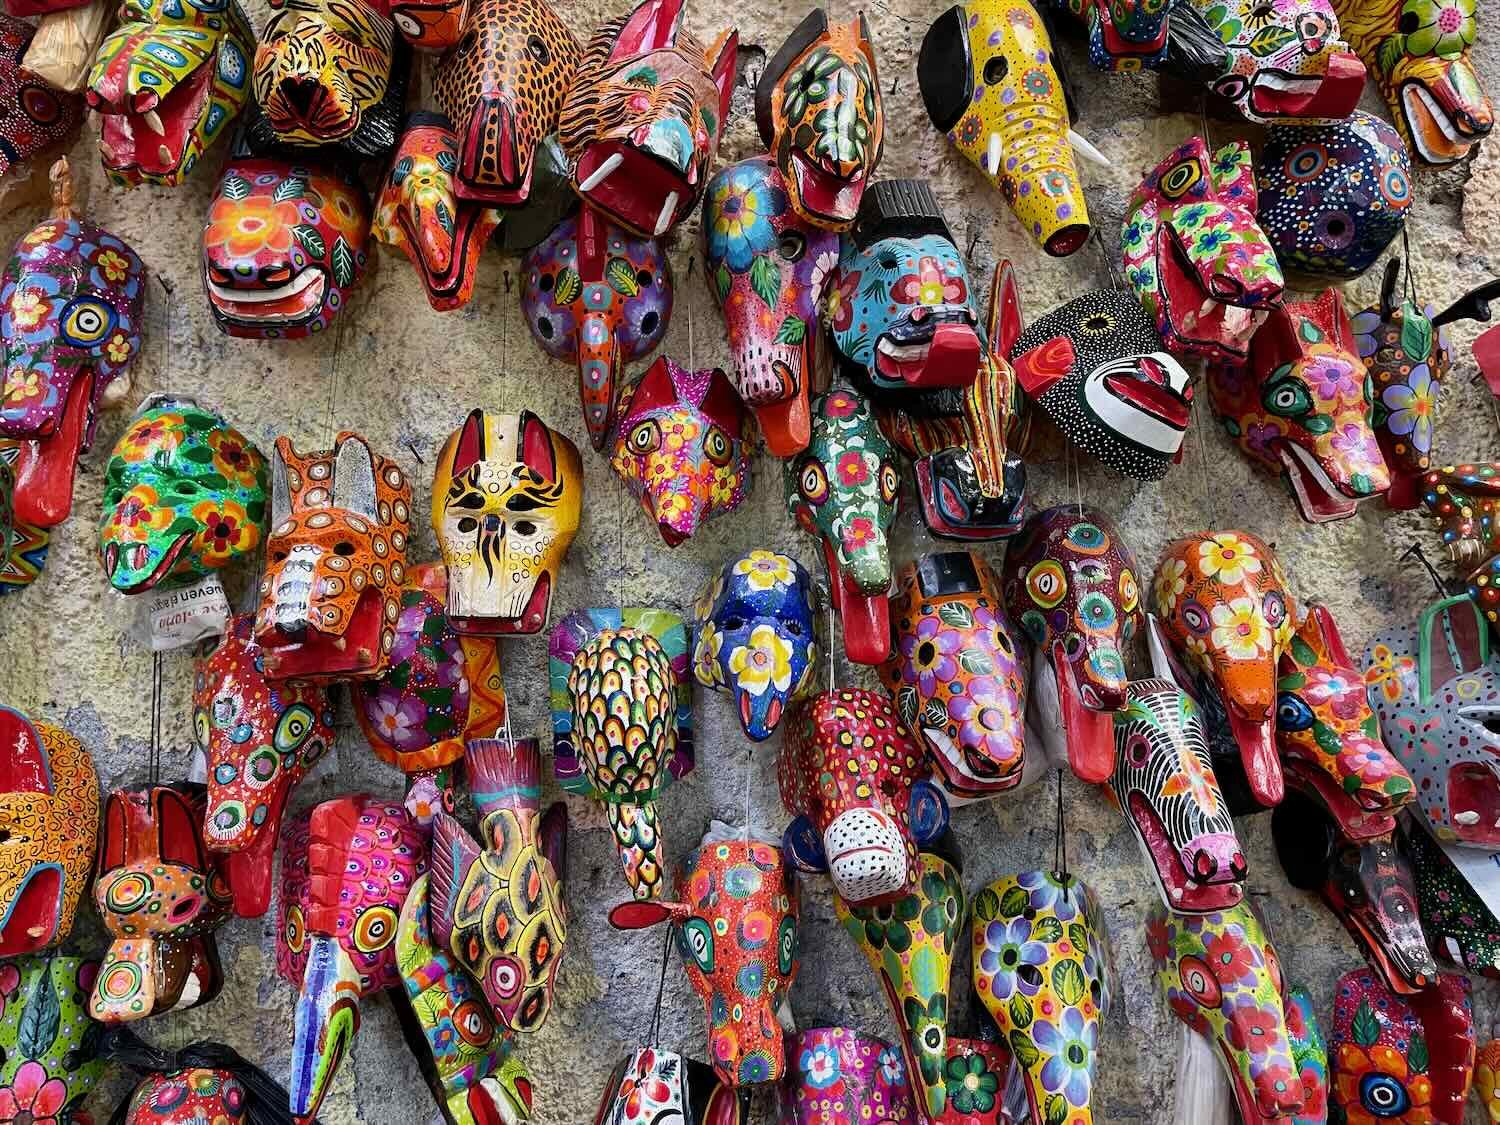 Colorful masks in the market